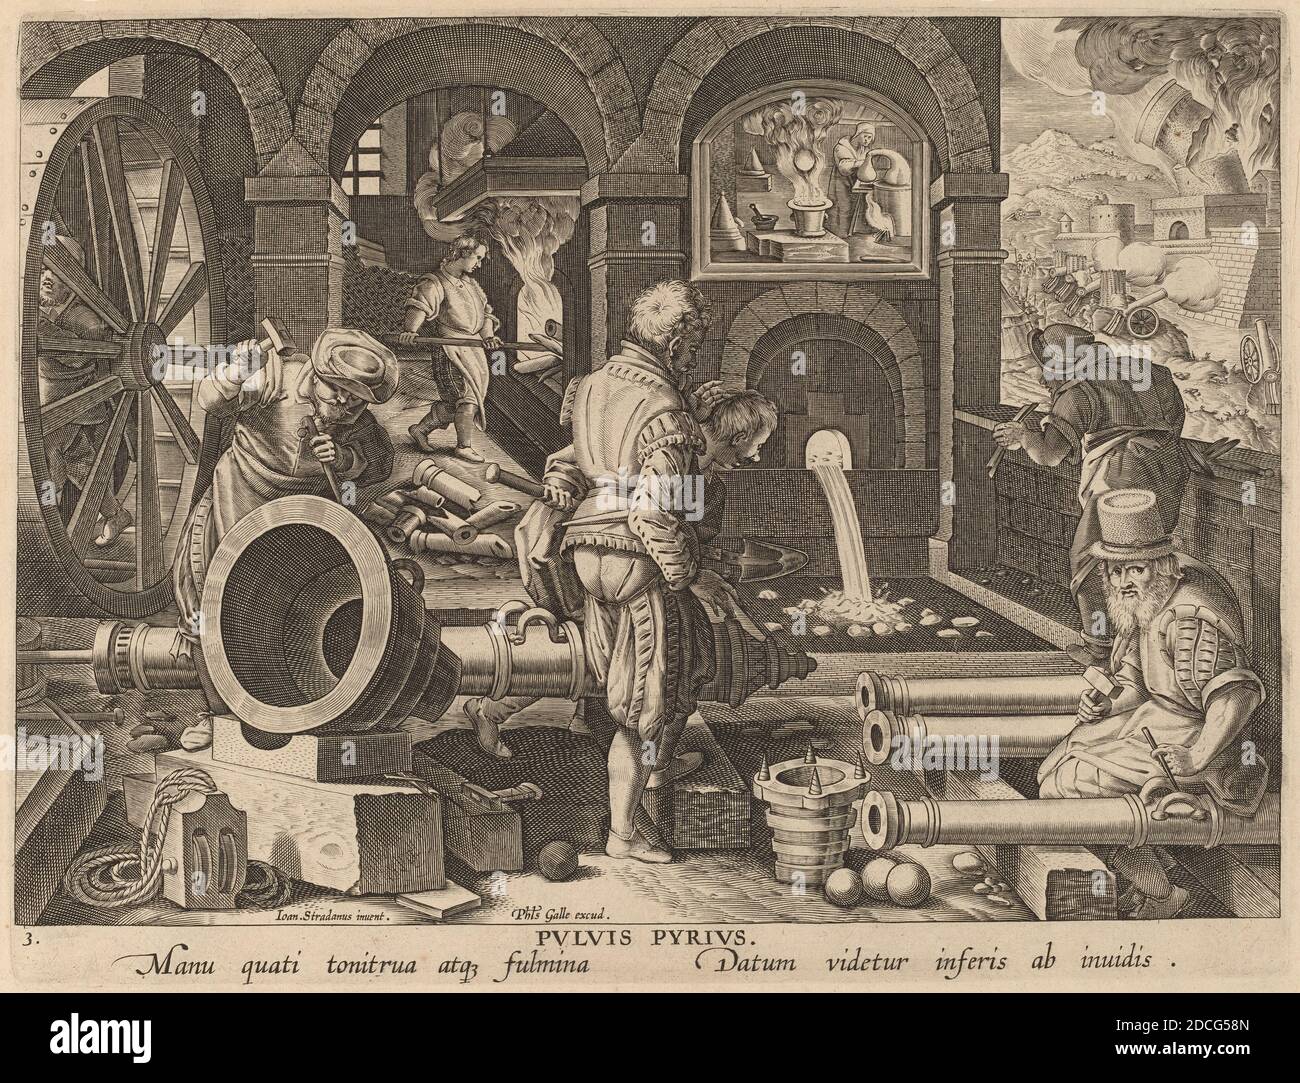 Theodor Galle, (artist), Flemish, c. 1571 - 1633, Jan van der Straet, (artist after), Flemish, 1523 - 1605, Casting of Cannons: pl.3, New Discoveries, (series), c. 1580/1590, engraving Stock Photo